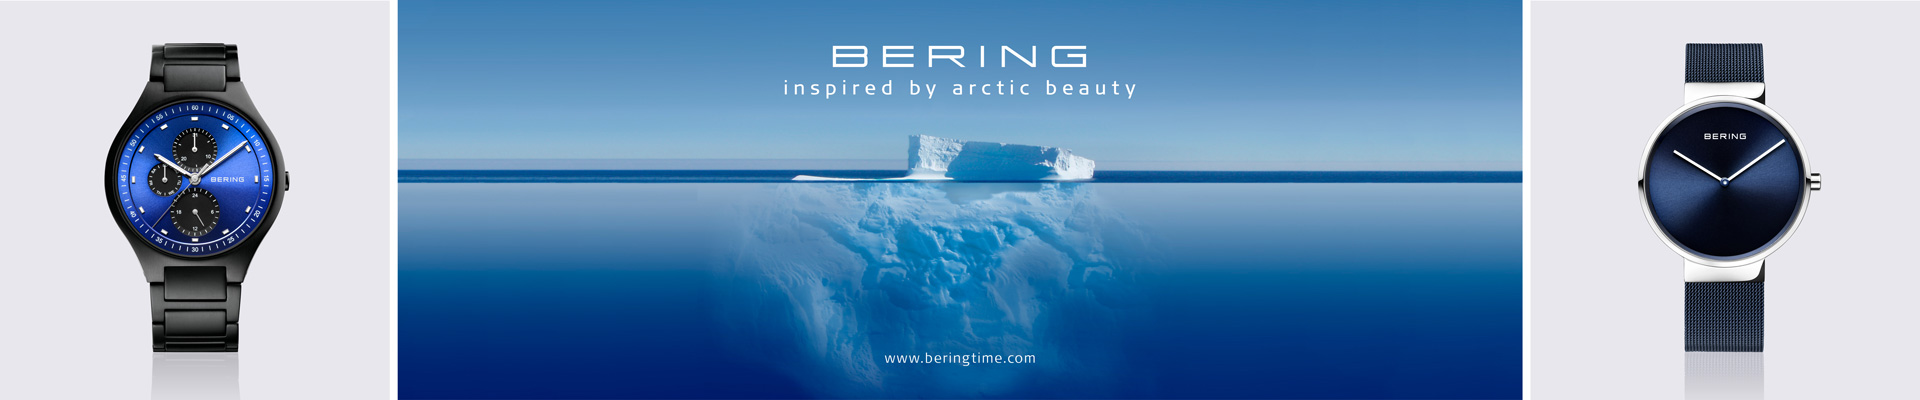 Bering Limited Edition